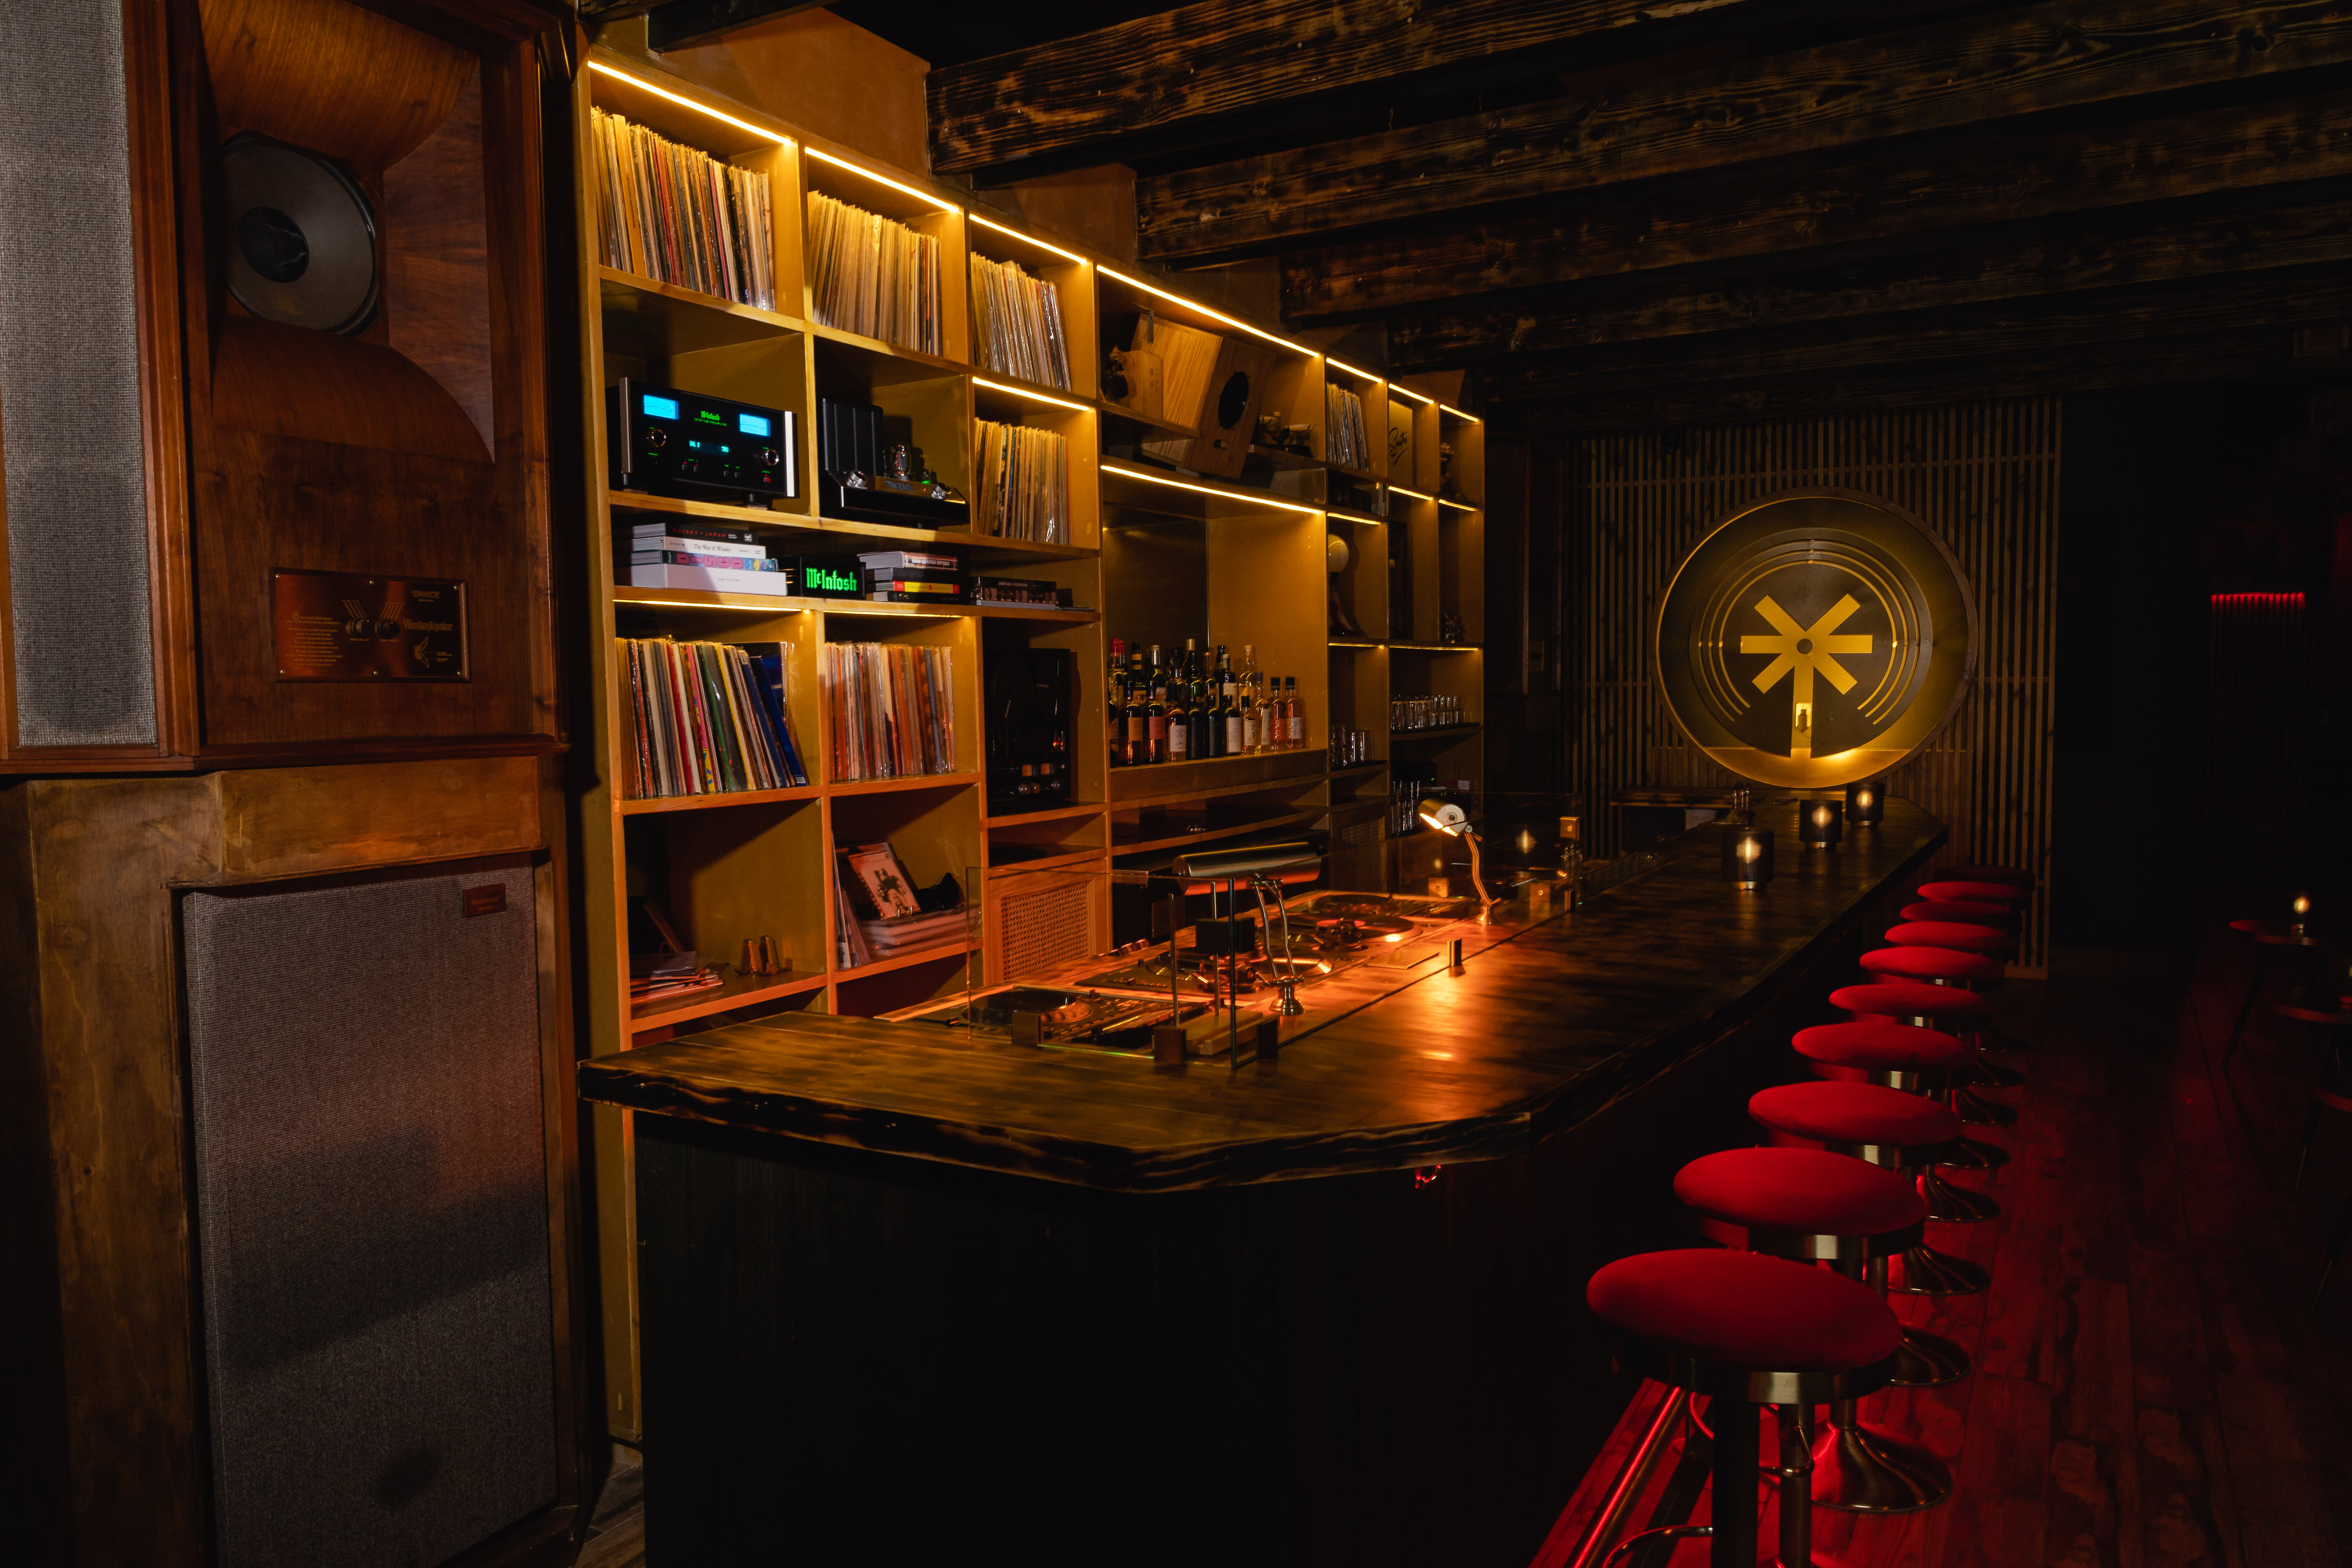 There's a brand new bar located in an attic in Downtown Miami